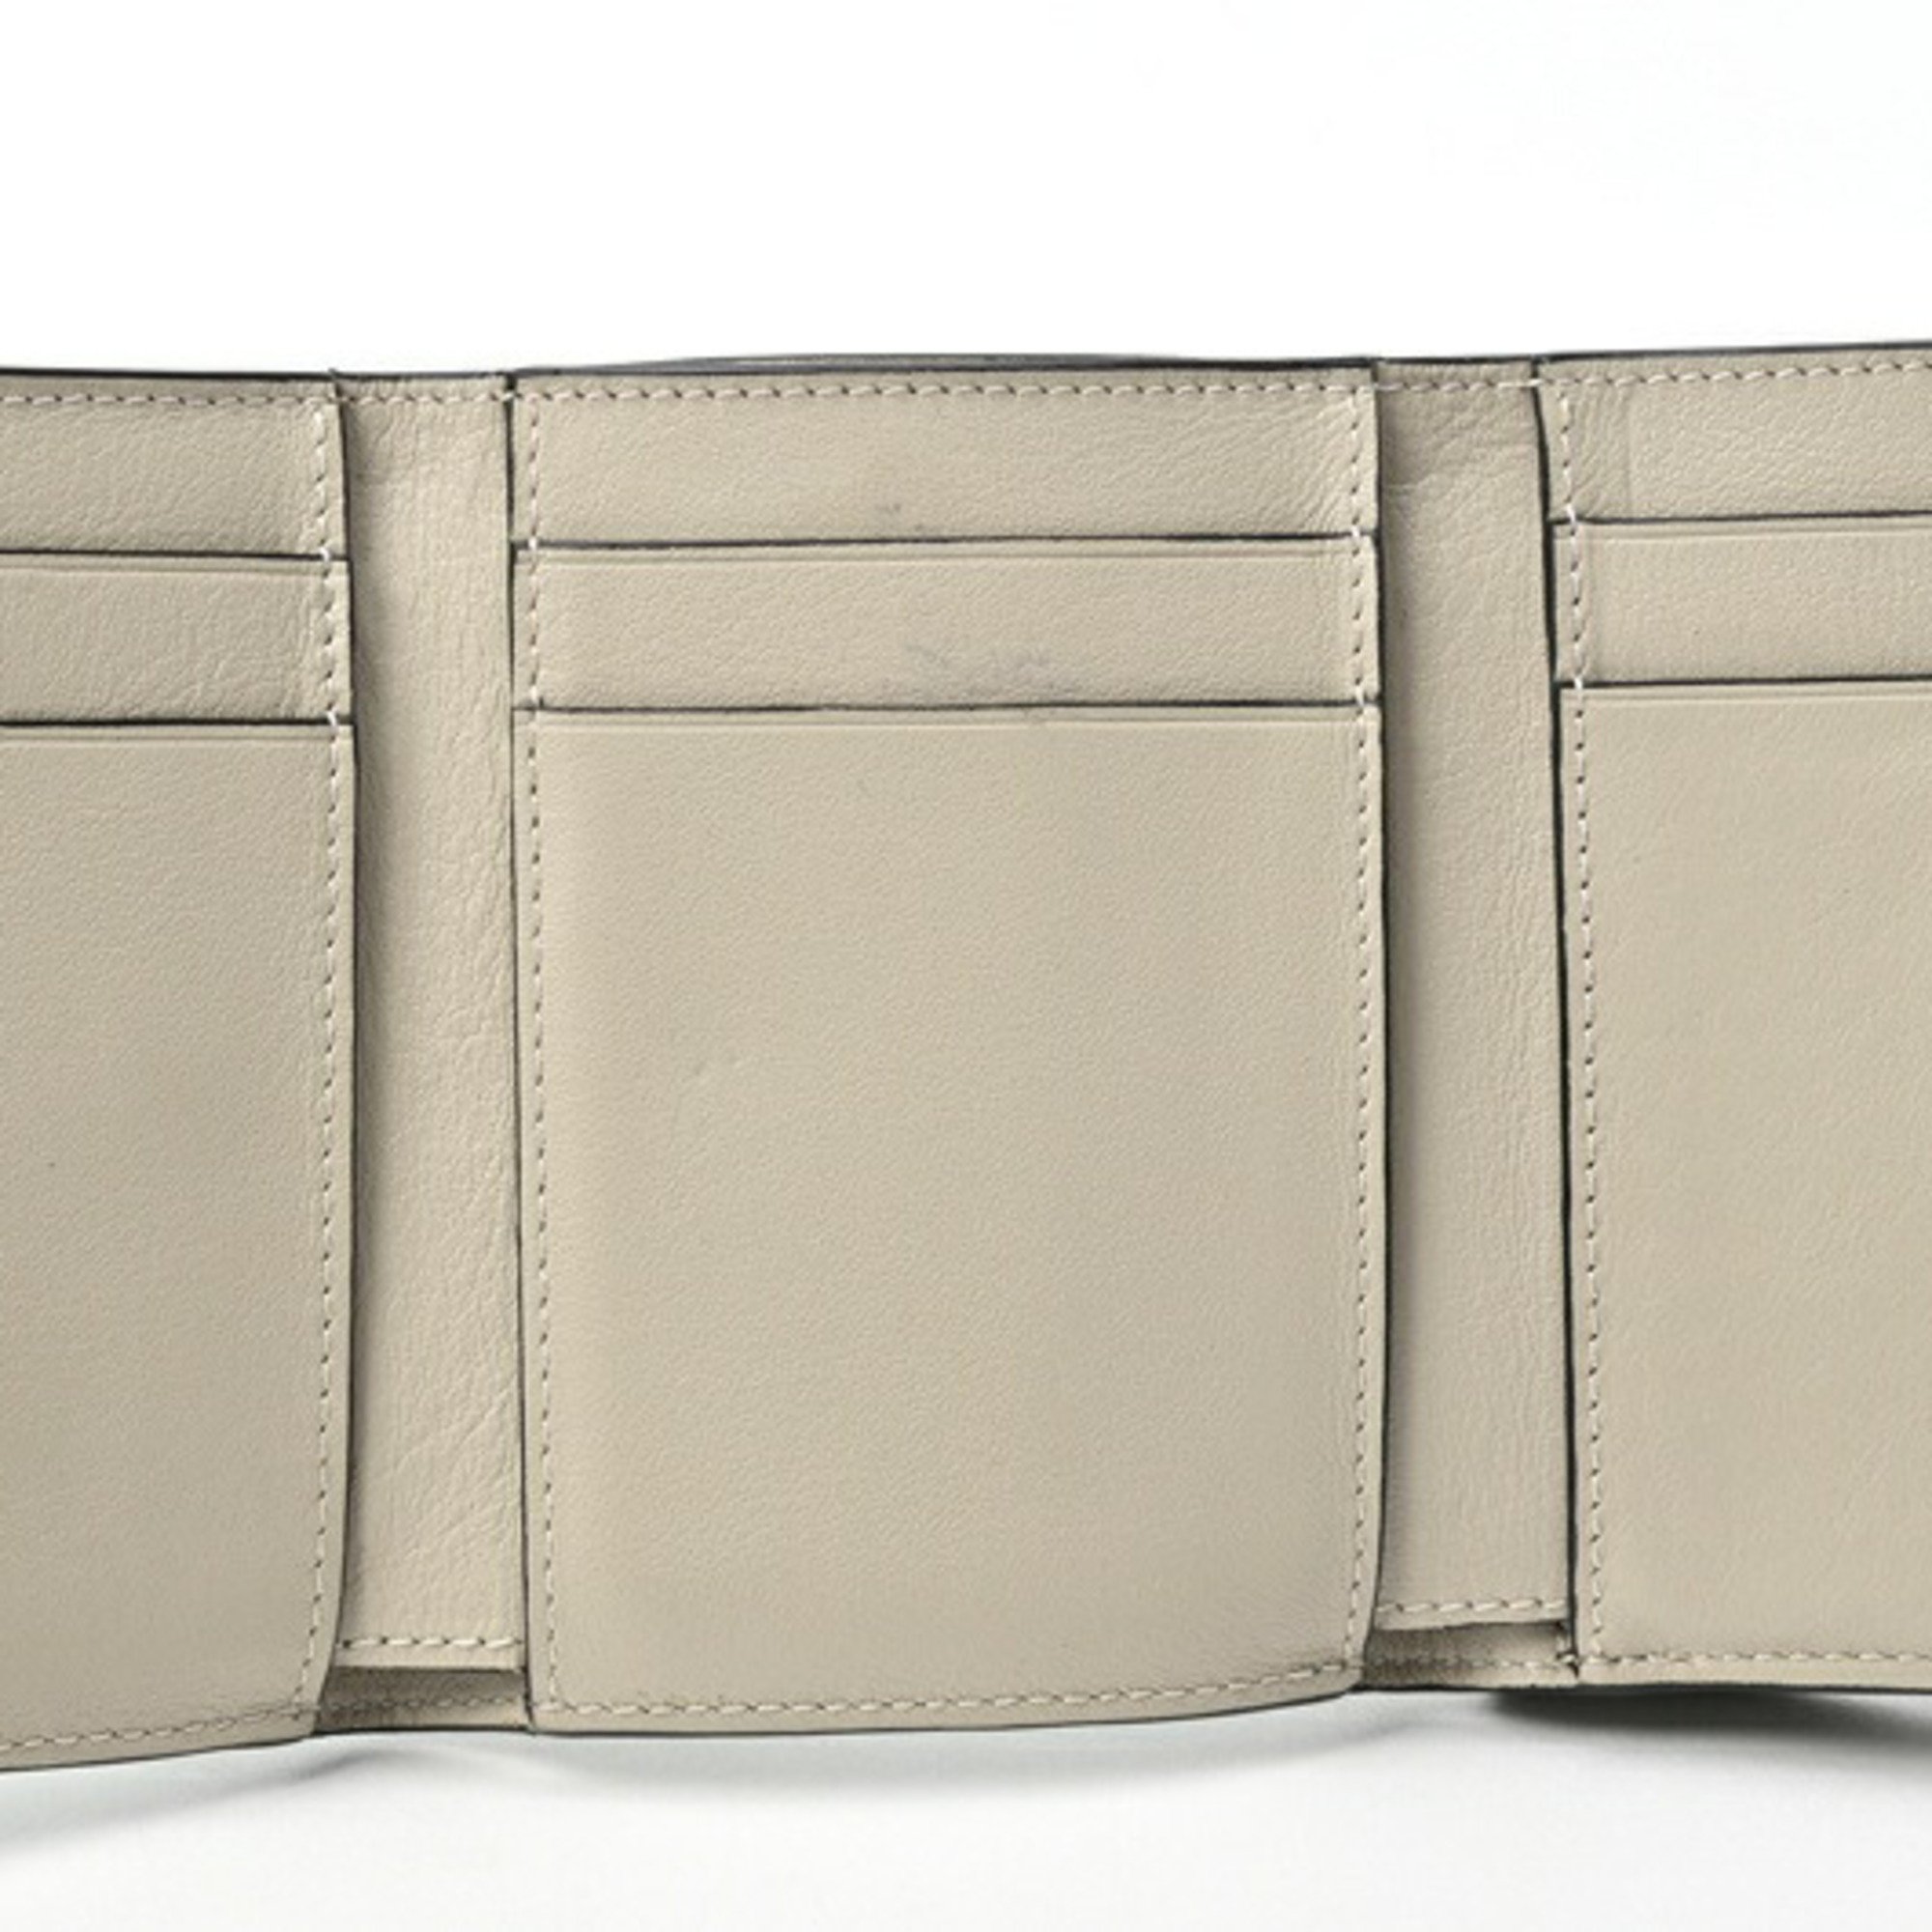 LOEWE Trifold Wallet C660S26X03 C660TR2X01 Rosemary Tan E-155439